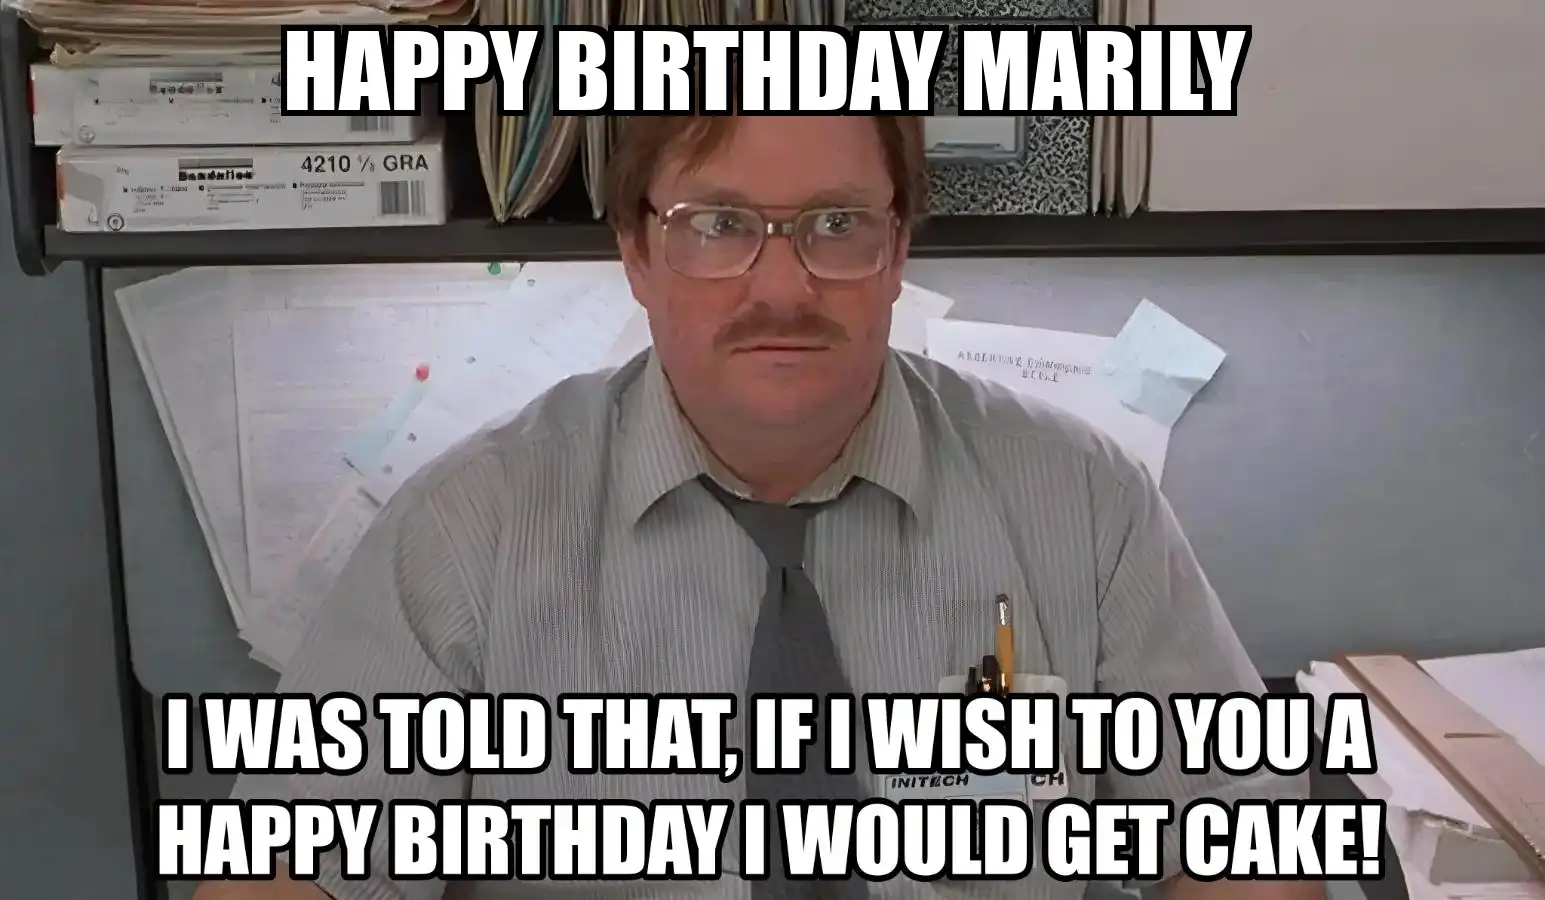 Happy Birthday Marily I Would Get A Cake Meme